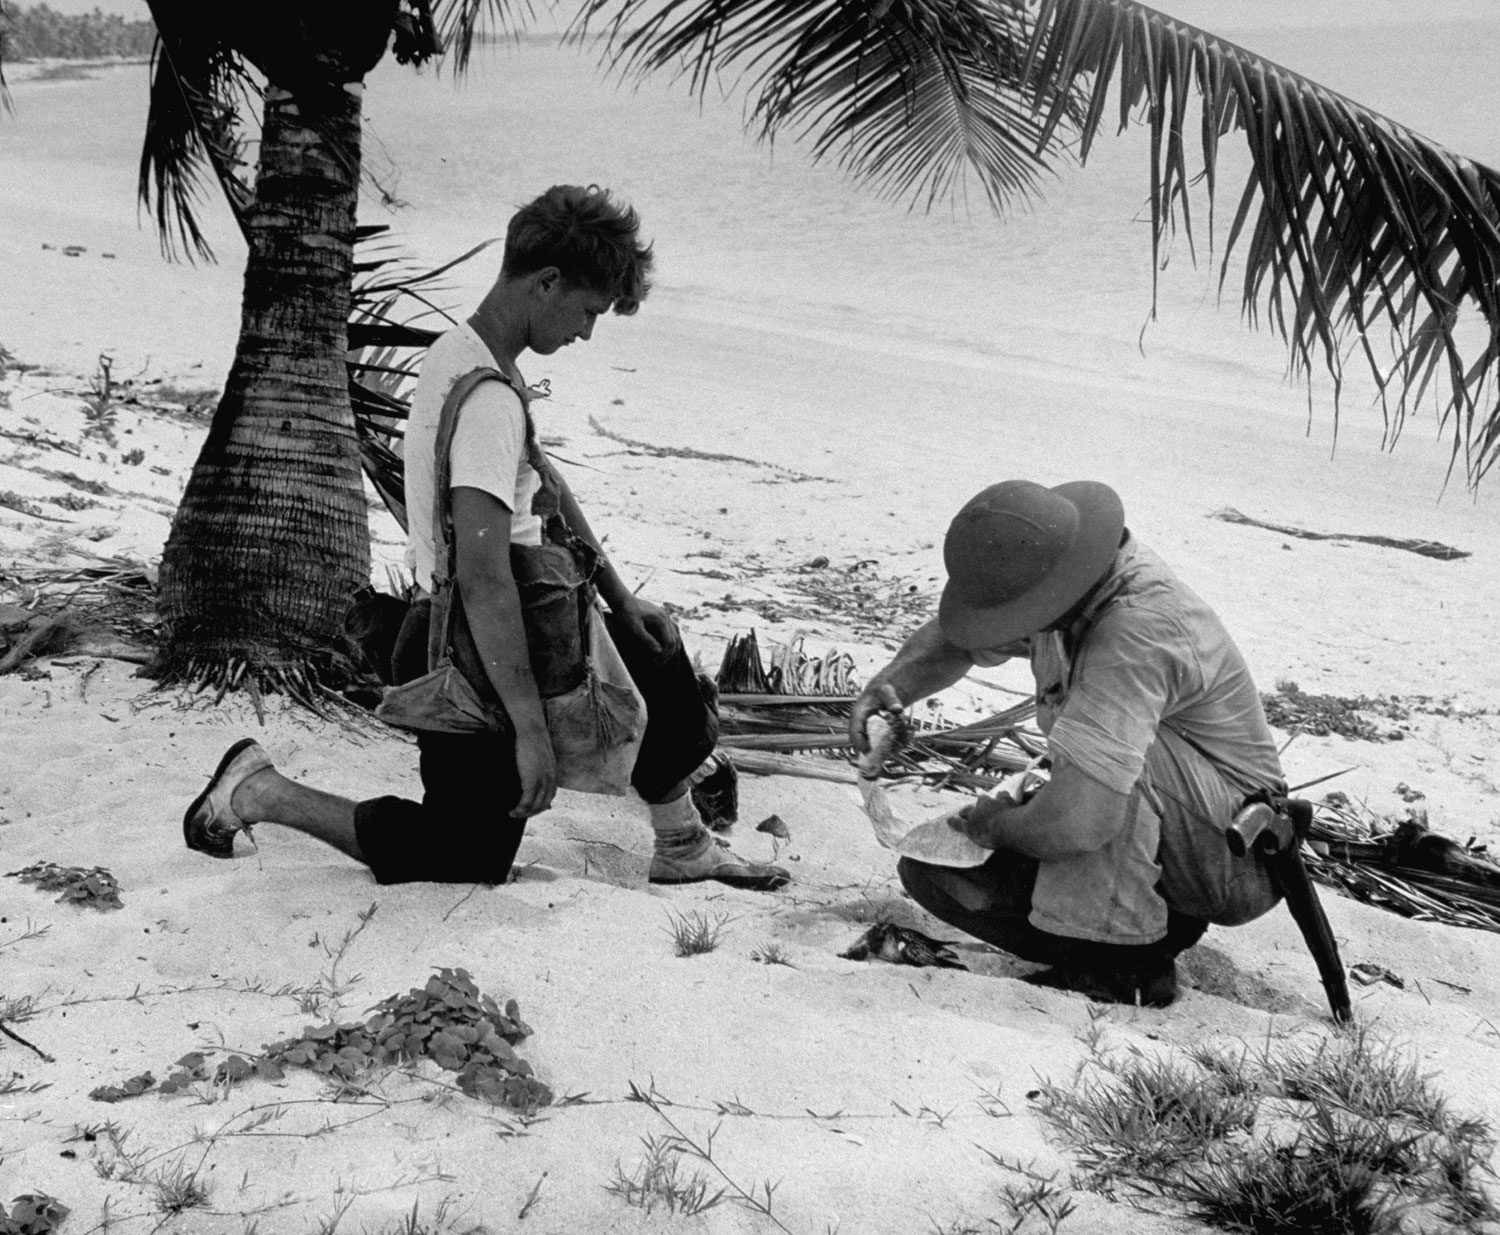 Gathering up dead birds on a South Pacific island for radiation testing, 1946.